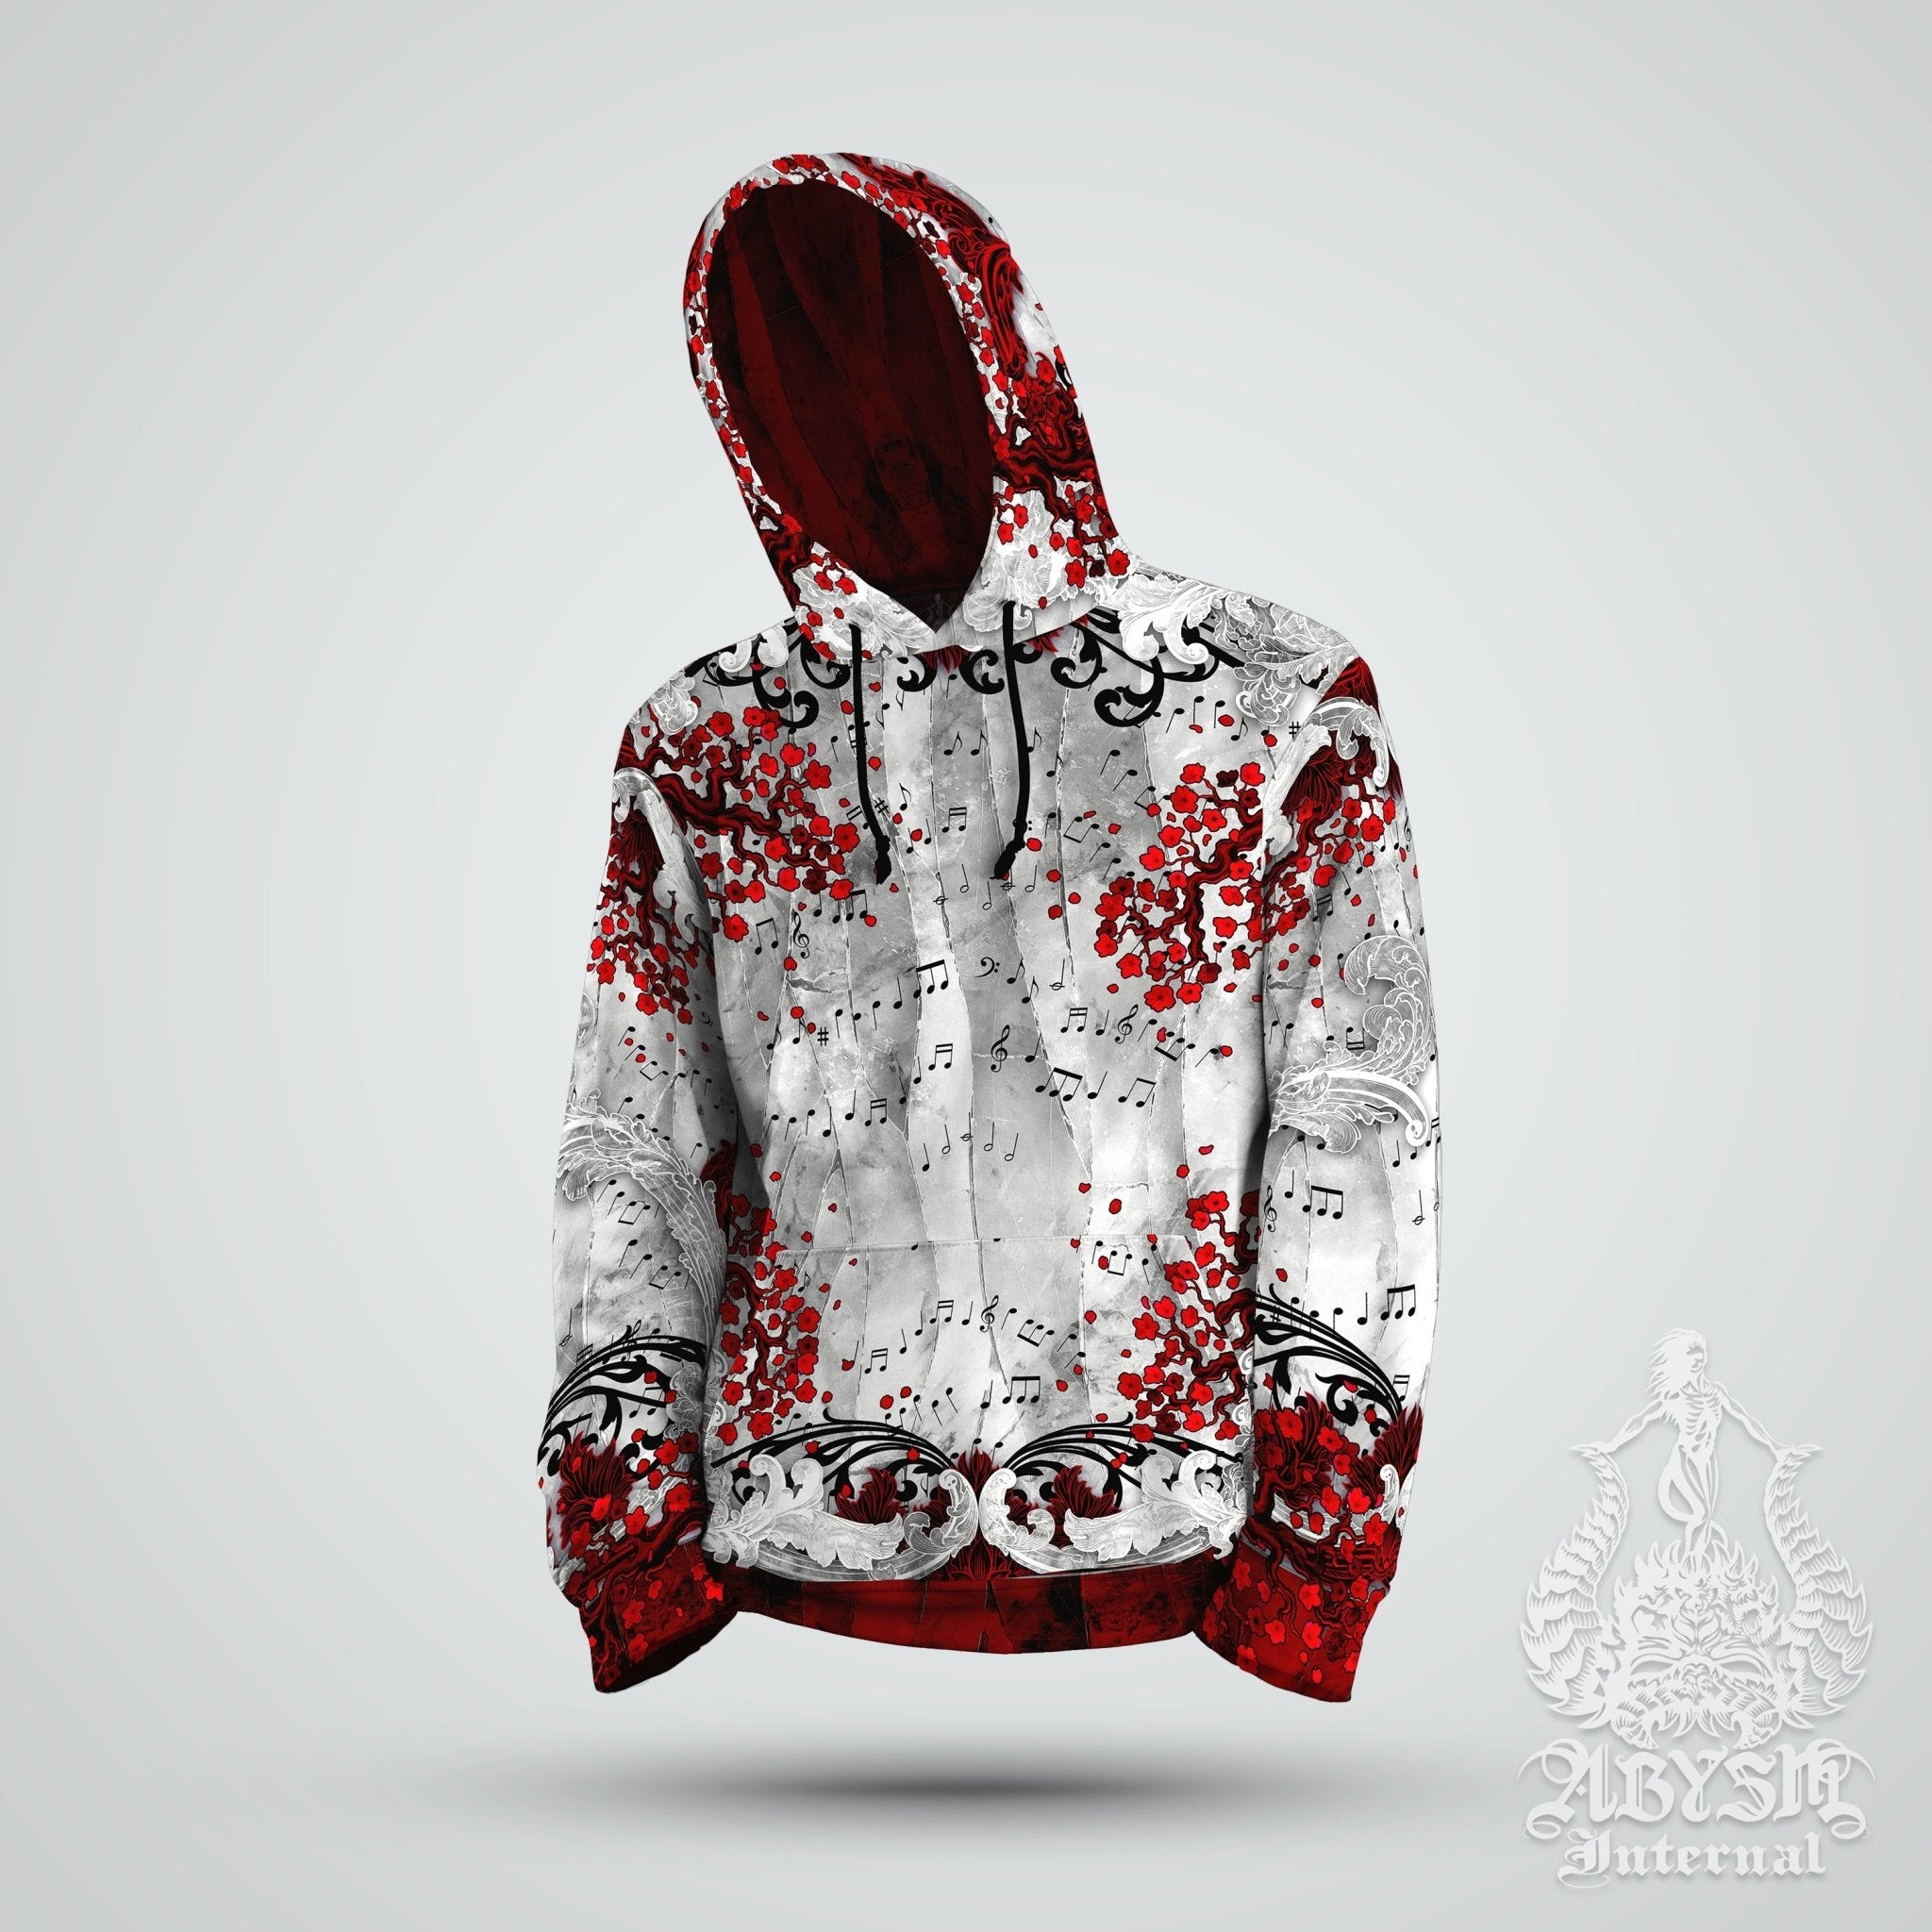 Red Dragon Hoodie, Hip Hop Outfit, Goth Music Festival Clothes, Alternative Clothing, Unisex - Bloody White - Abysm Internal